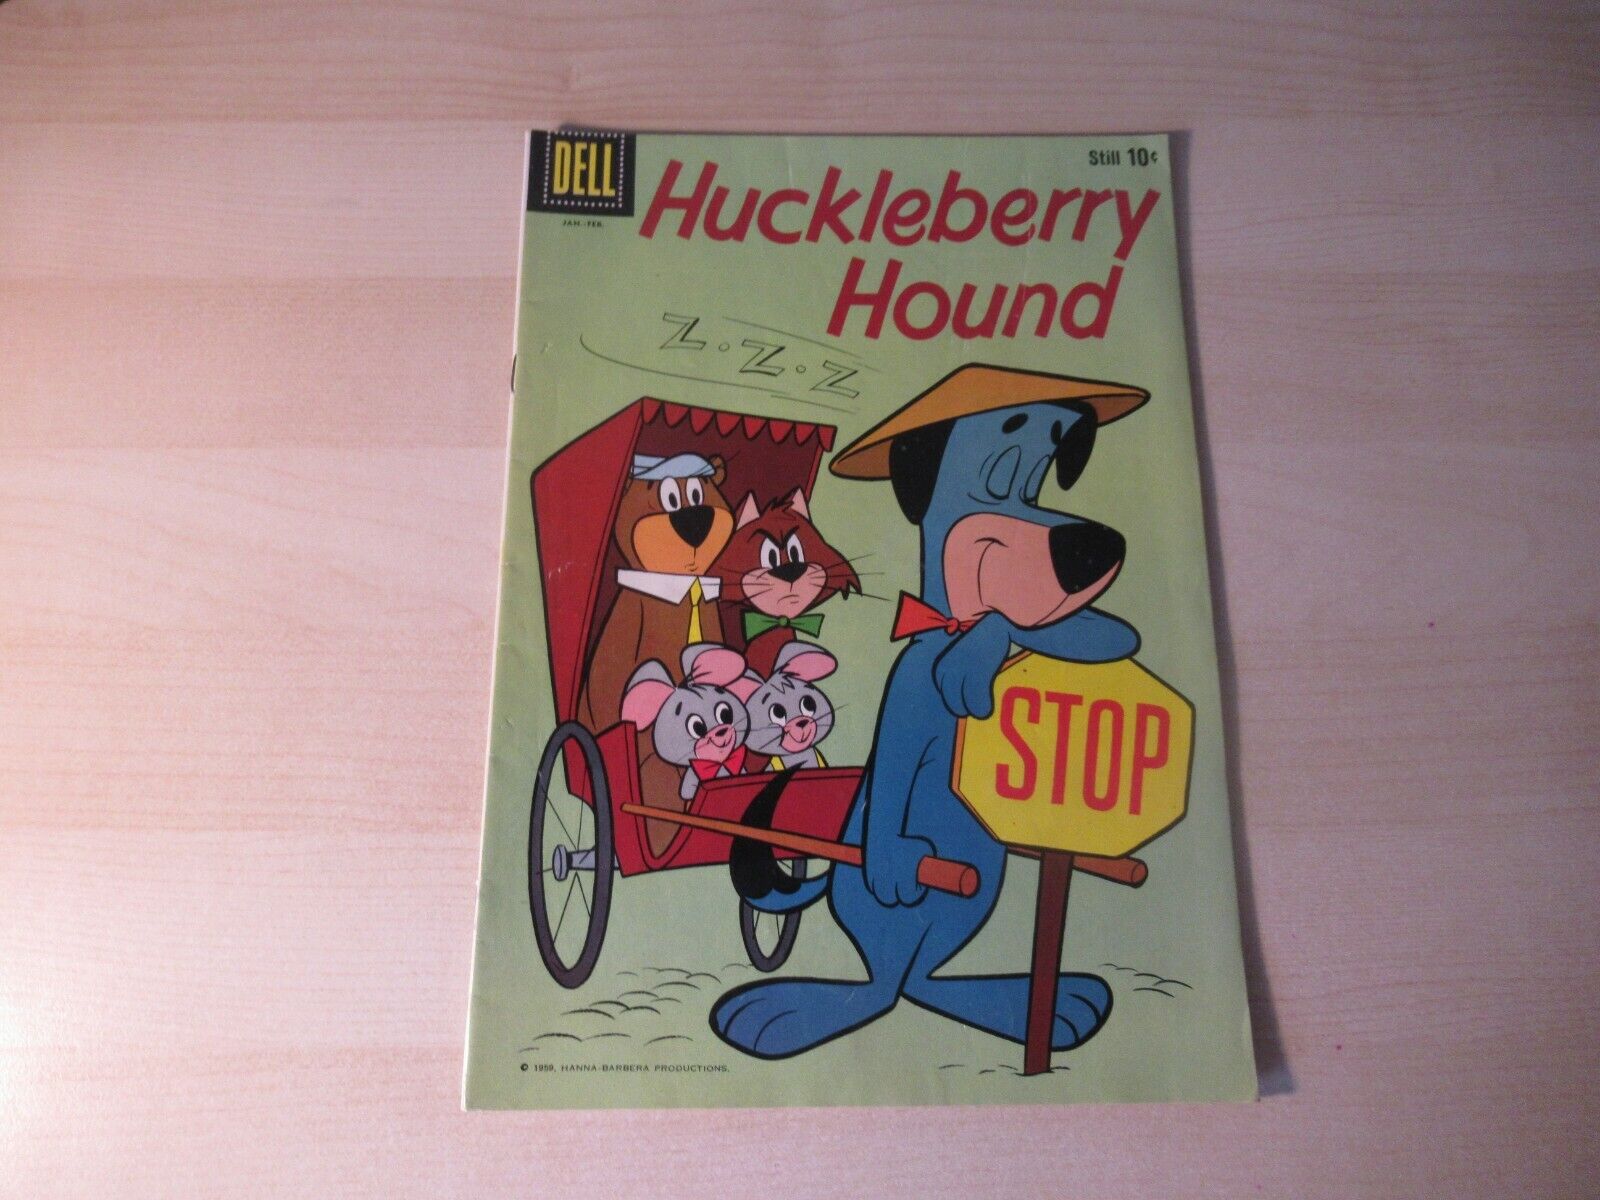 HUCKLEBERRY HOUND #3 (#1) DELL SILVER AGE HIGHER TO HIGH GRADE NICE LOOKING BOOK